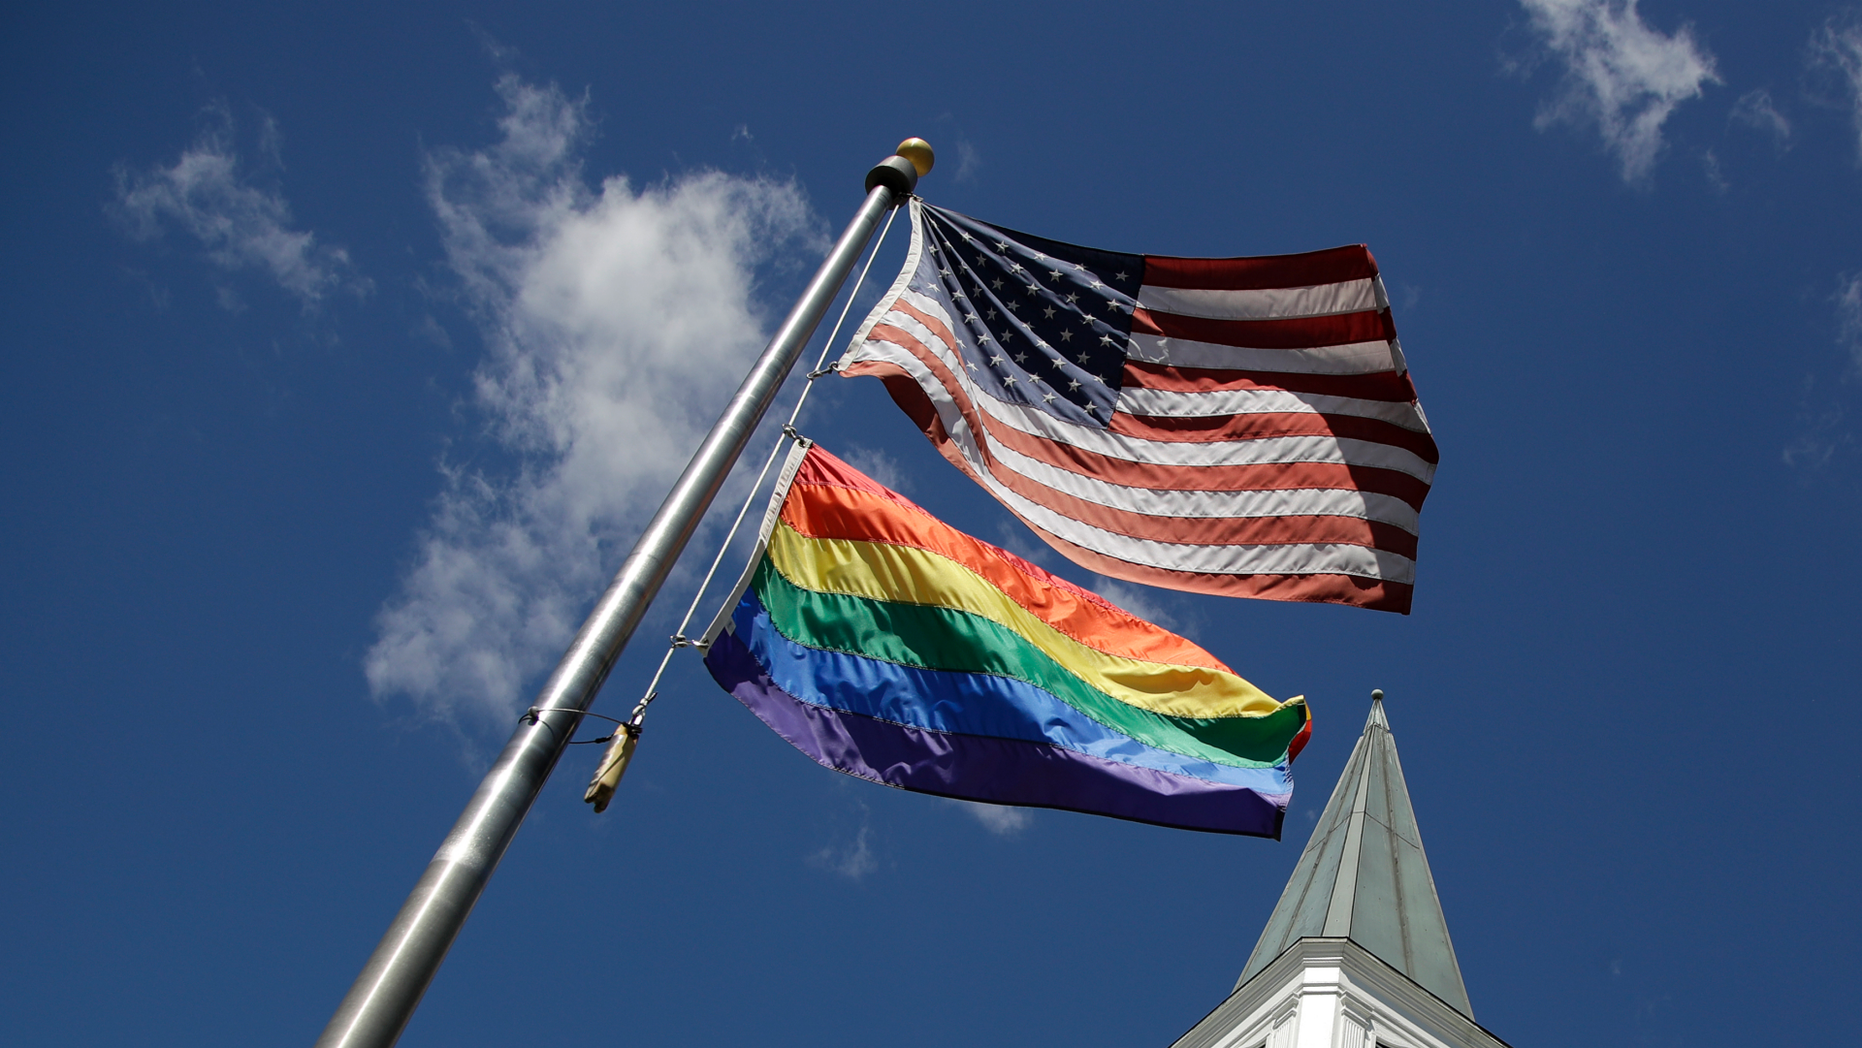 A gay pride rainbow flag flies along with the U.S. flag in front of the Asbury United Methodist Church in Prairie Village, Kan., on Friday, April 19, 2019. There's at least one area of agreement among conservative, centrist and liberal leaders in the United Methodist Church: America's largest mainline Protestant denomination is on a path toward likely breakup over differences on same-sex marriage and ordination of LGBT pastors. (AP Photo/Charlie Riedel)